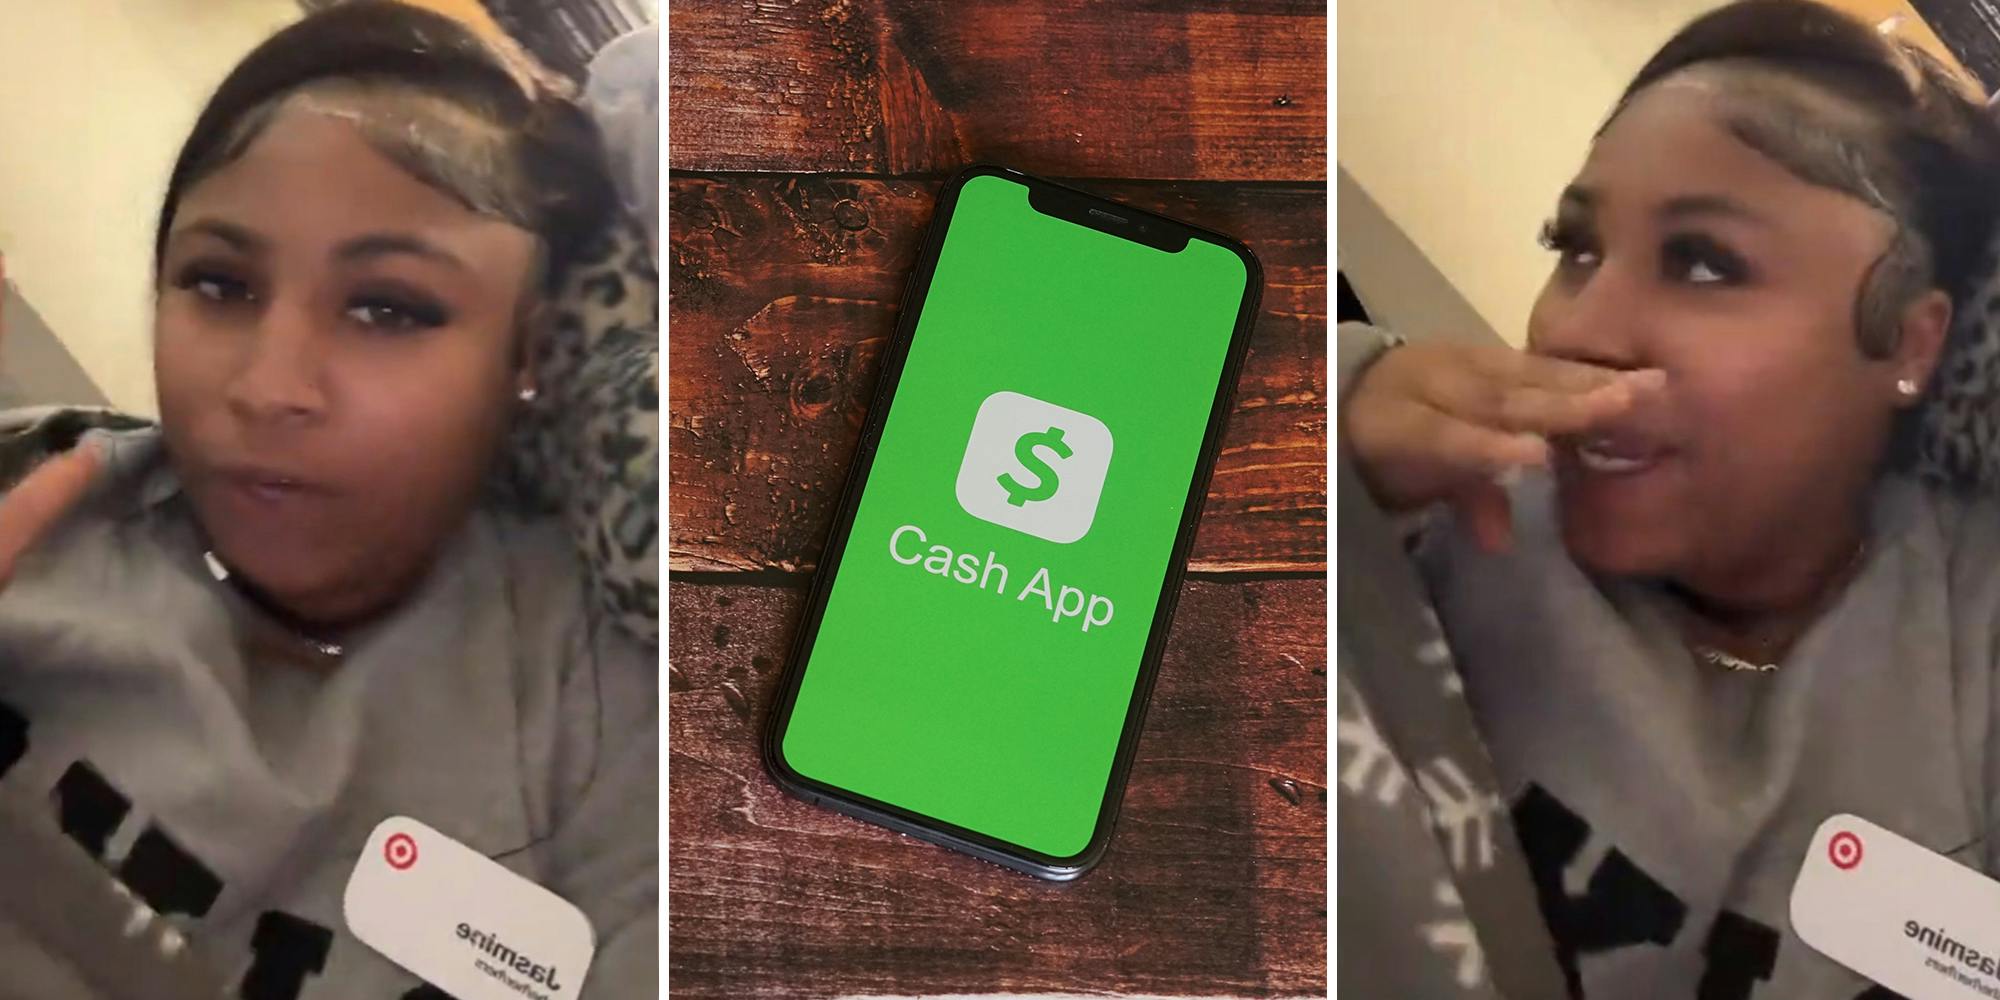 ‘I’m at $300 right now’: Woman shares trick for increasing borrow limit on CashApp